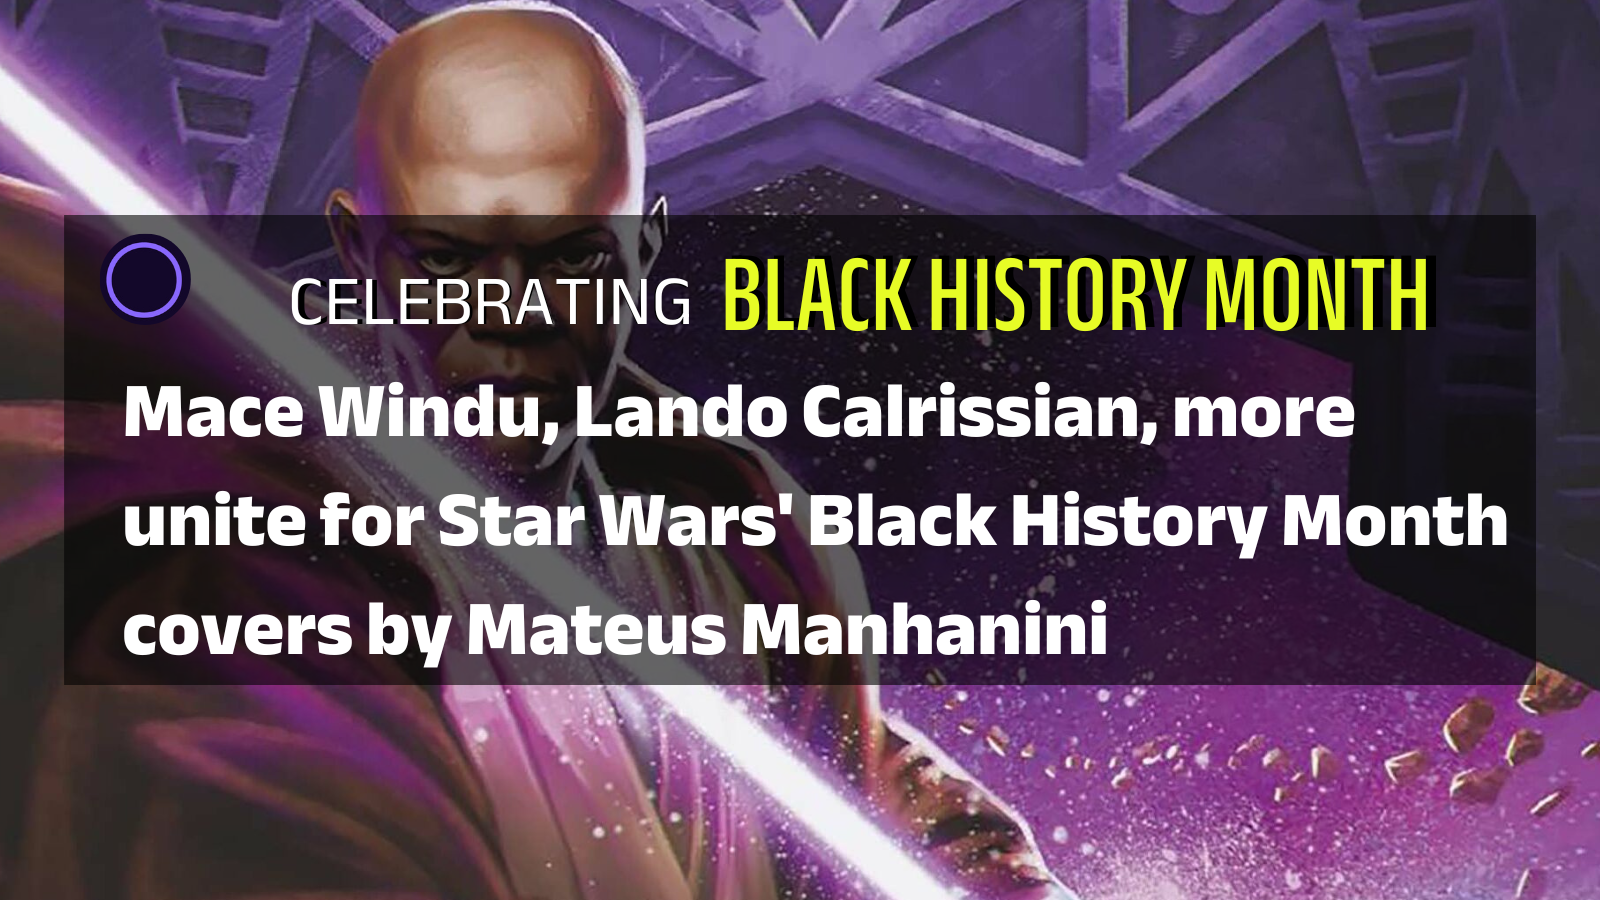 Illustration featuring Mace Windu with an overlay that read Celebrating Black History Month: Mace Windu, Lando Calrissian, more unite for Star Wars' Black History Month covers by Mateus Manhanini